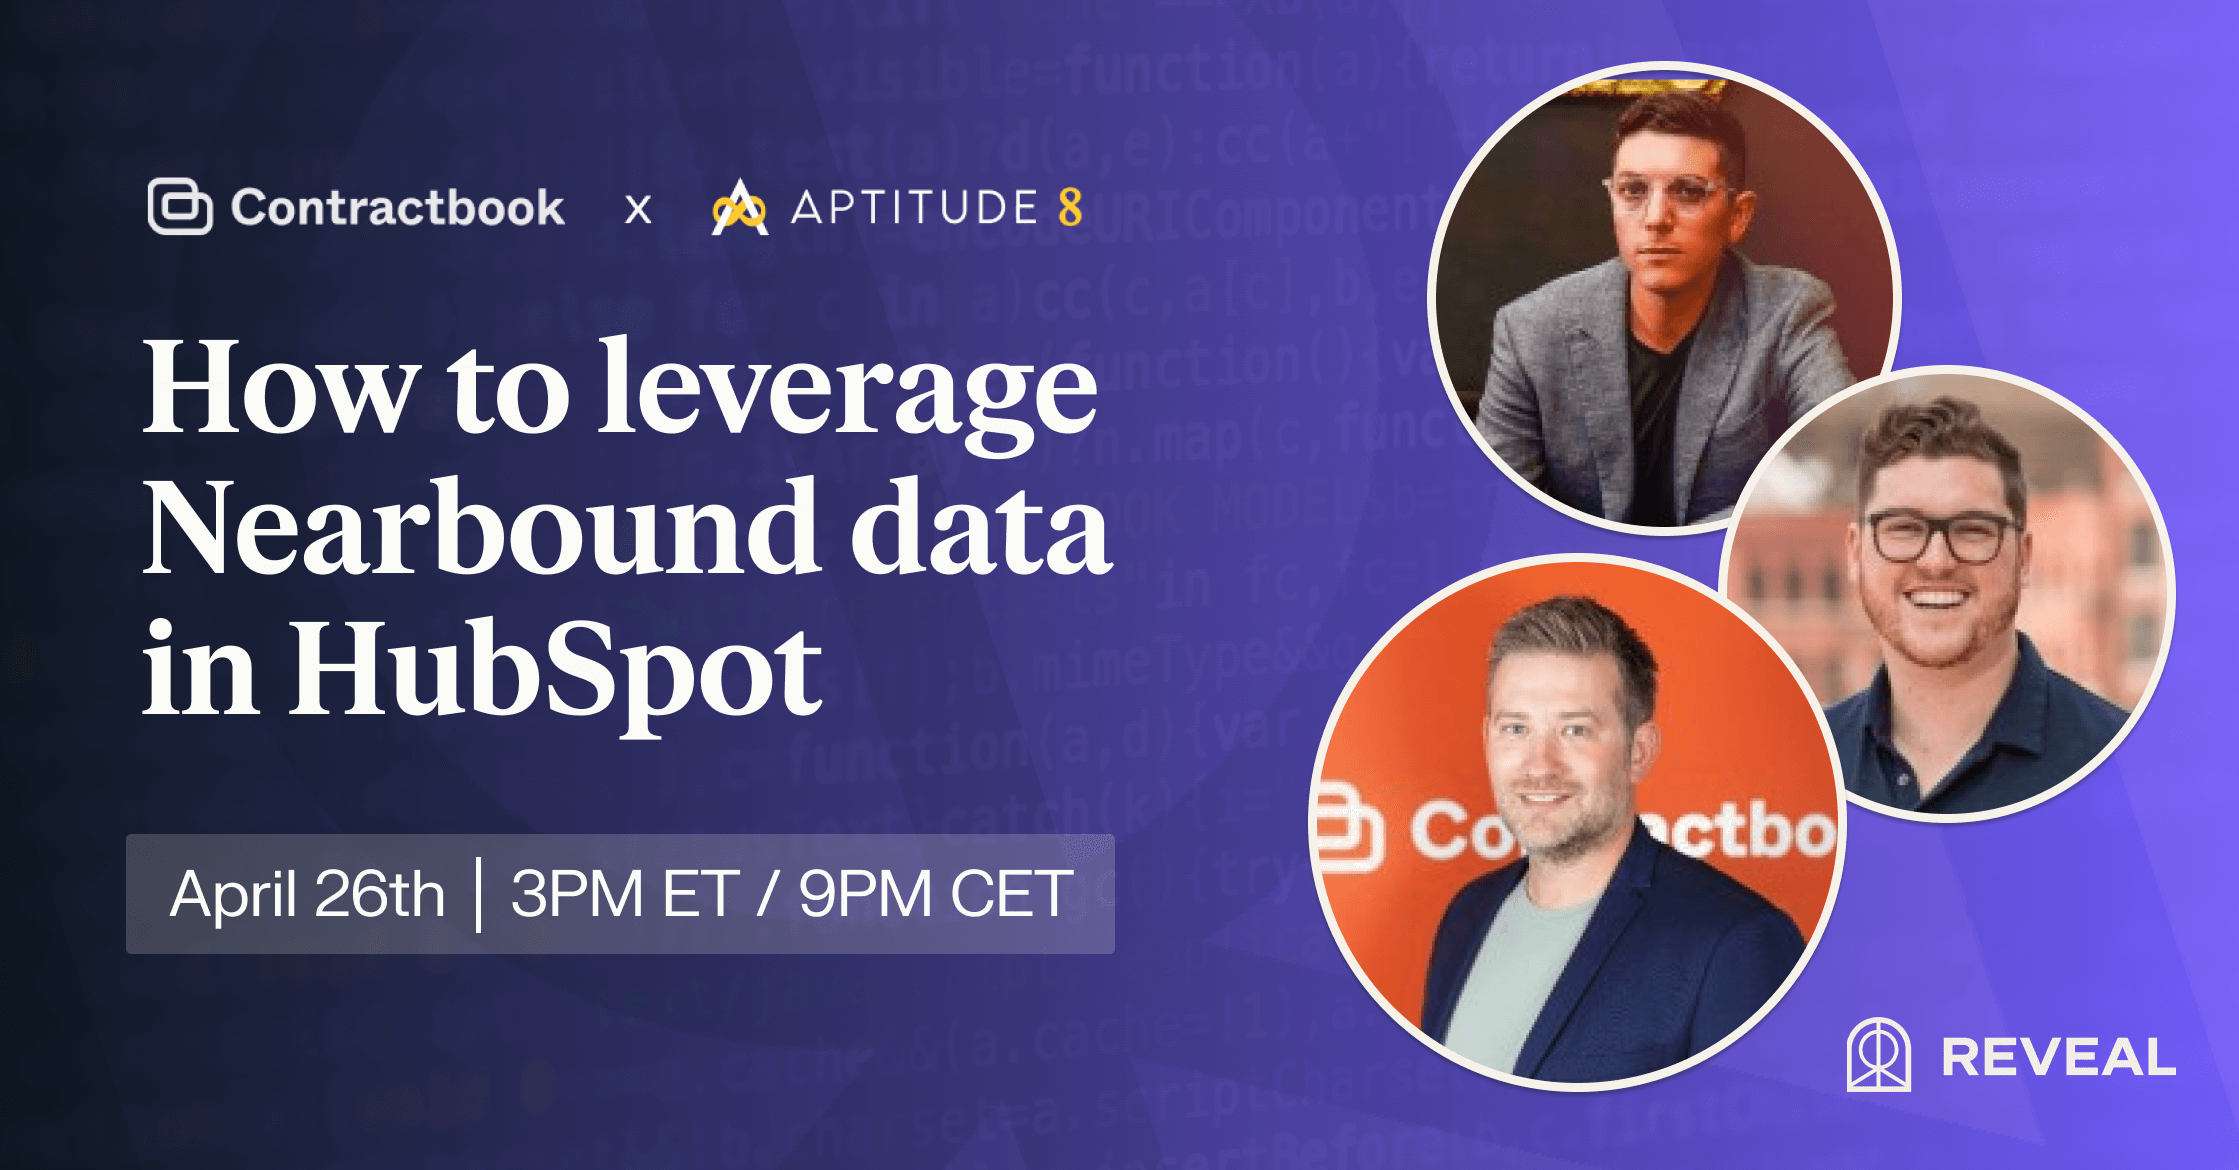 How to leverage nearbound data in HubSpot event with Reveal and Aptitude 8